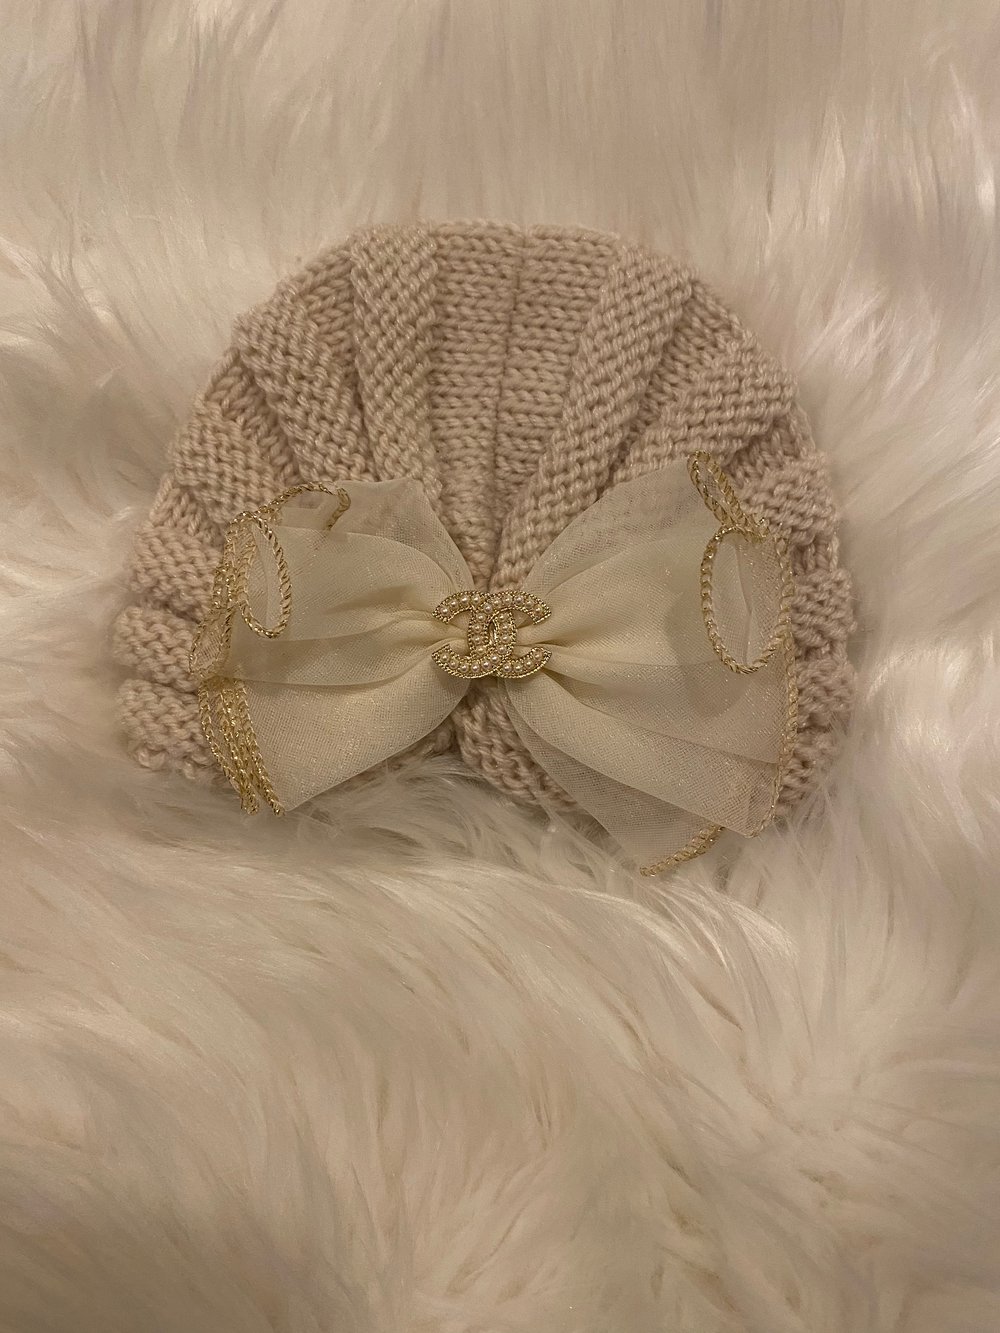 Image of Baby hat